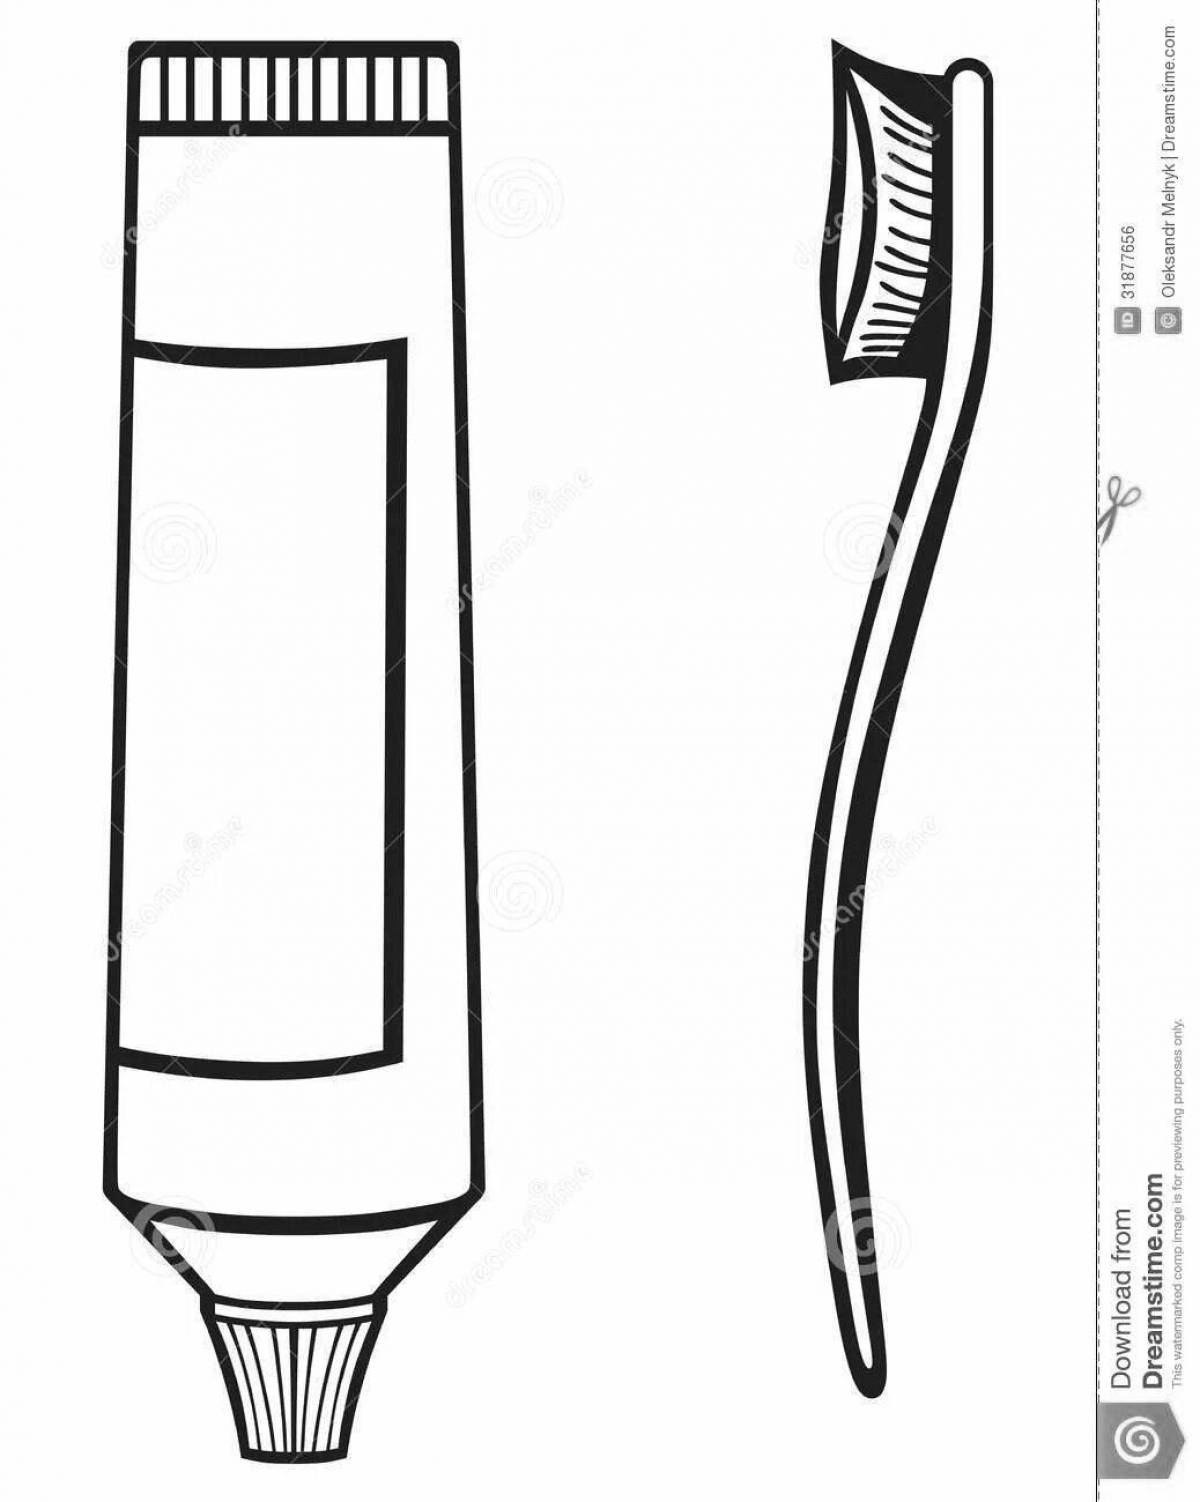 Fun toothbrush and toothpaste coloring page